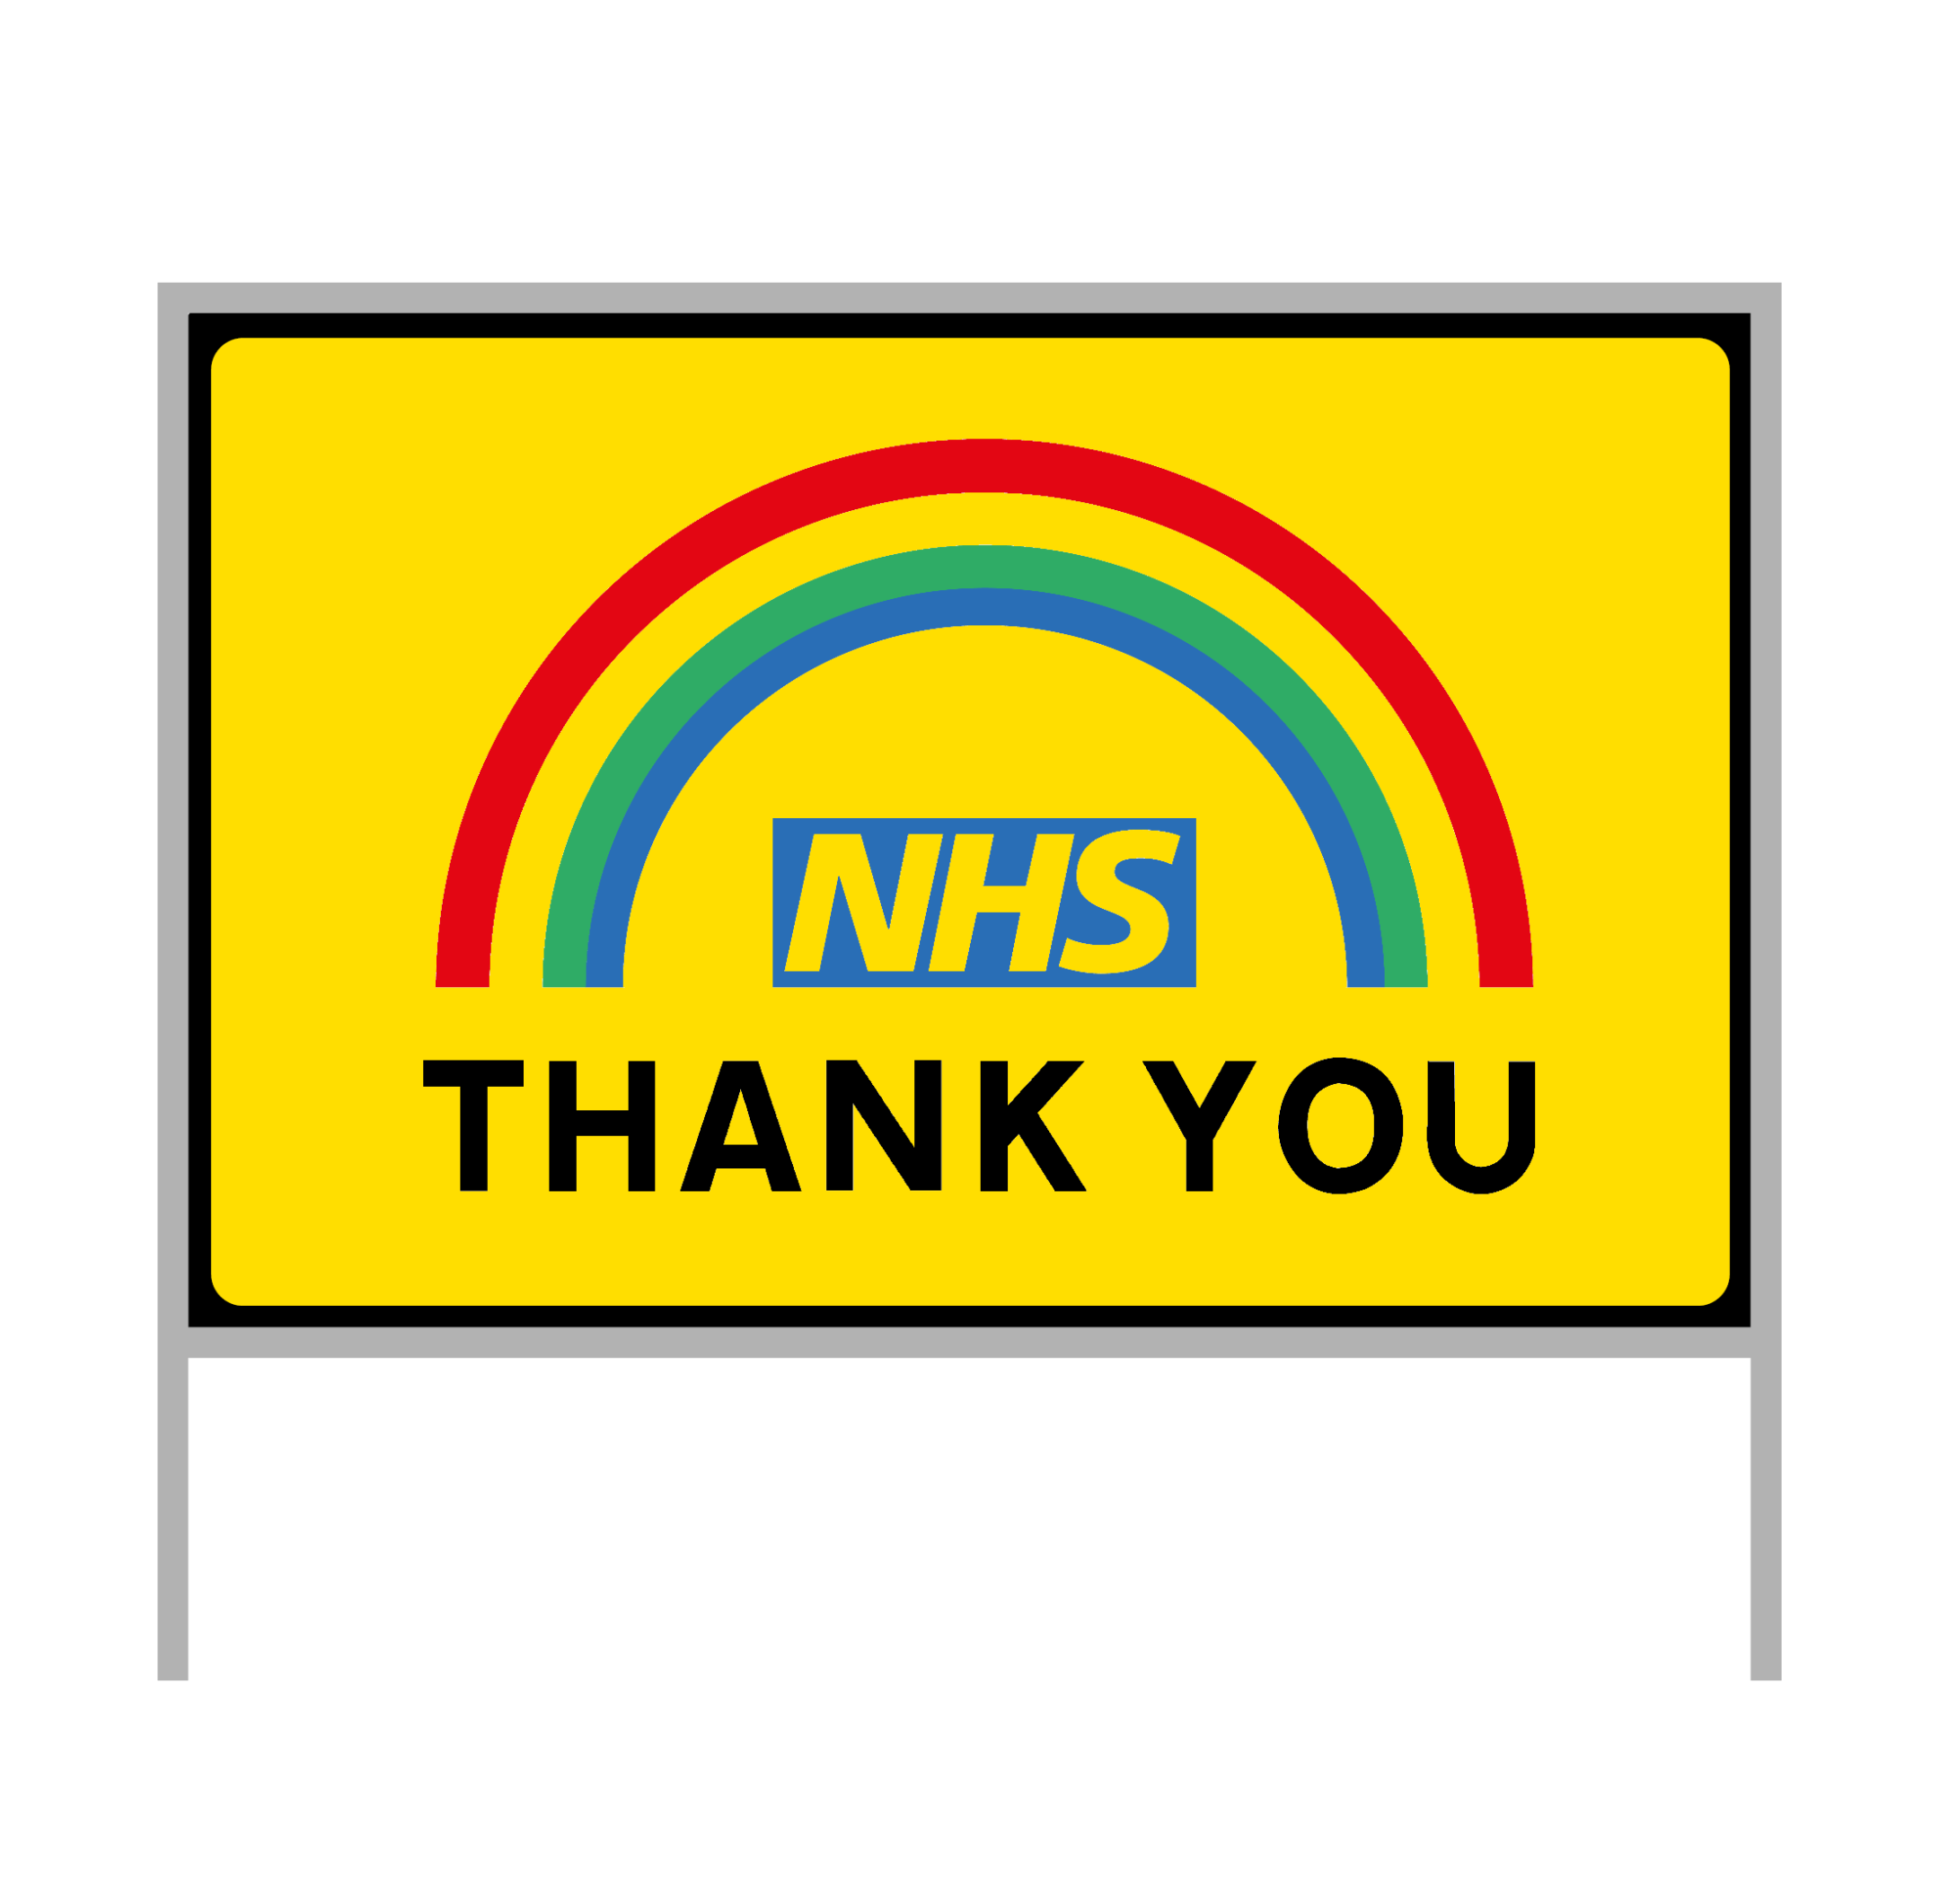 Road sign - Covid-19 - NHS Thank you - Size 1050 x 750